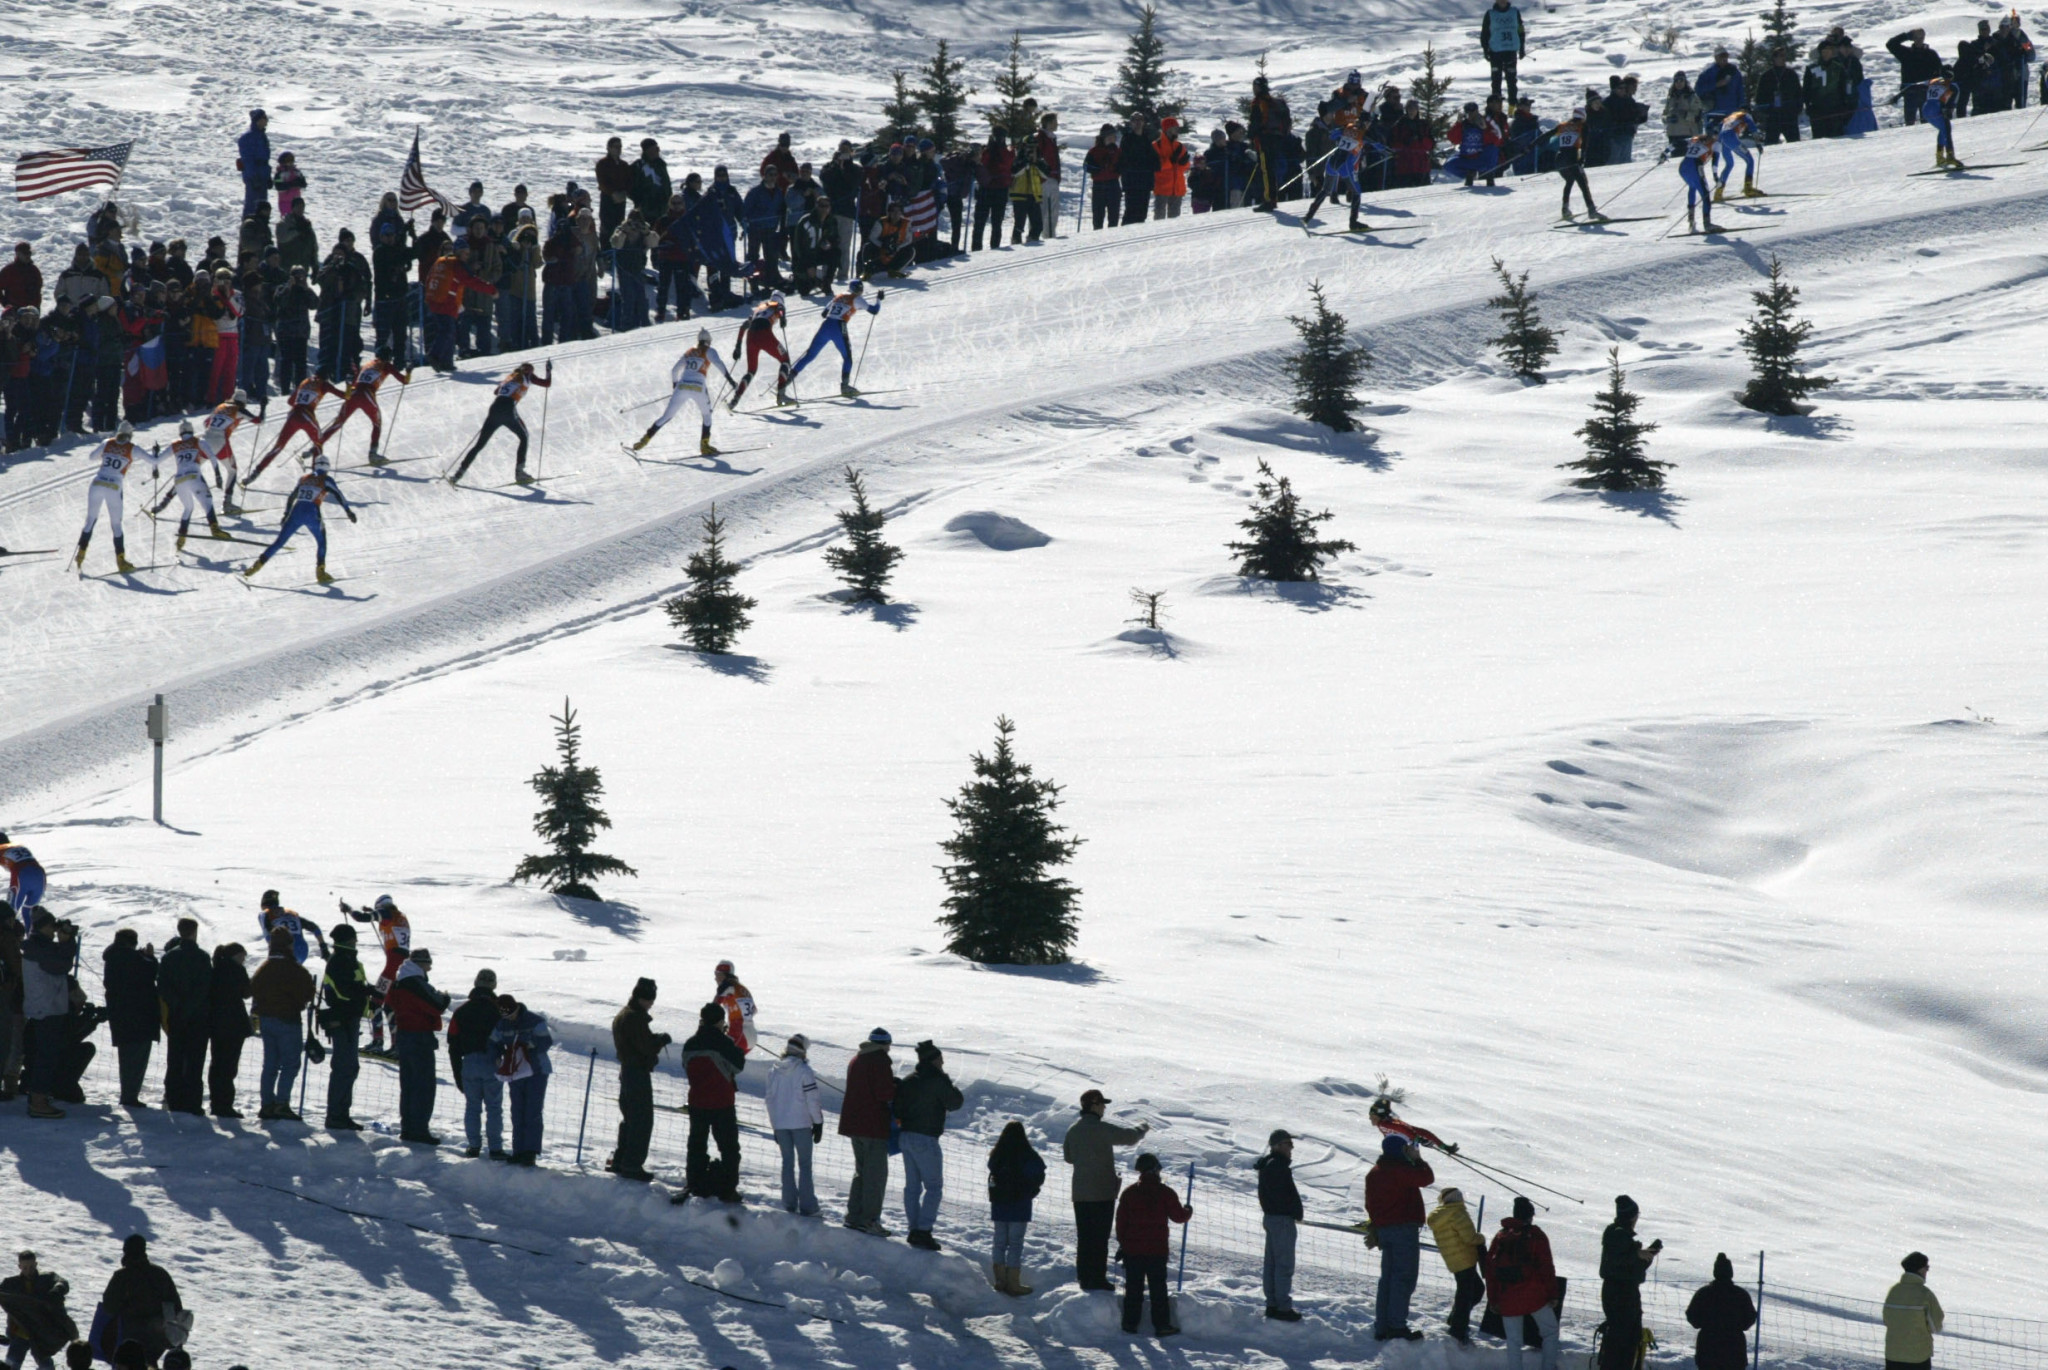 Biathletes from 33 countries expected at IBU Youth and Junior World Championships in Soldier Hollow 